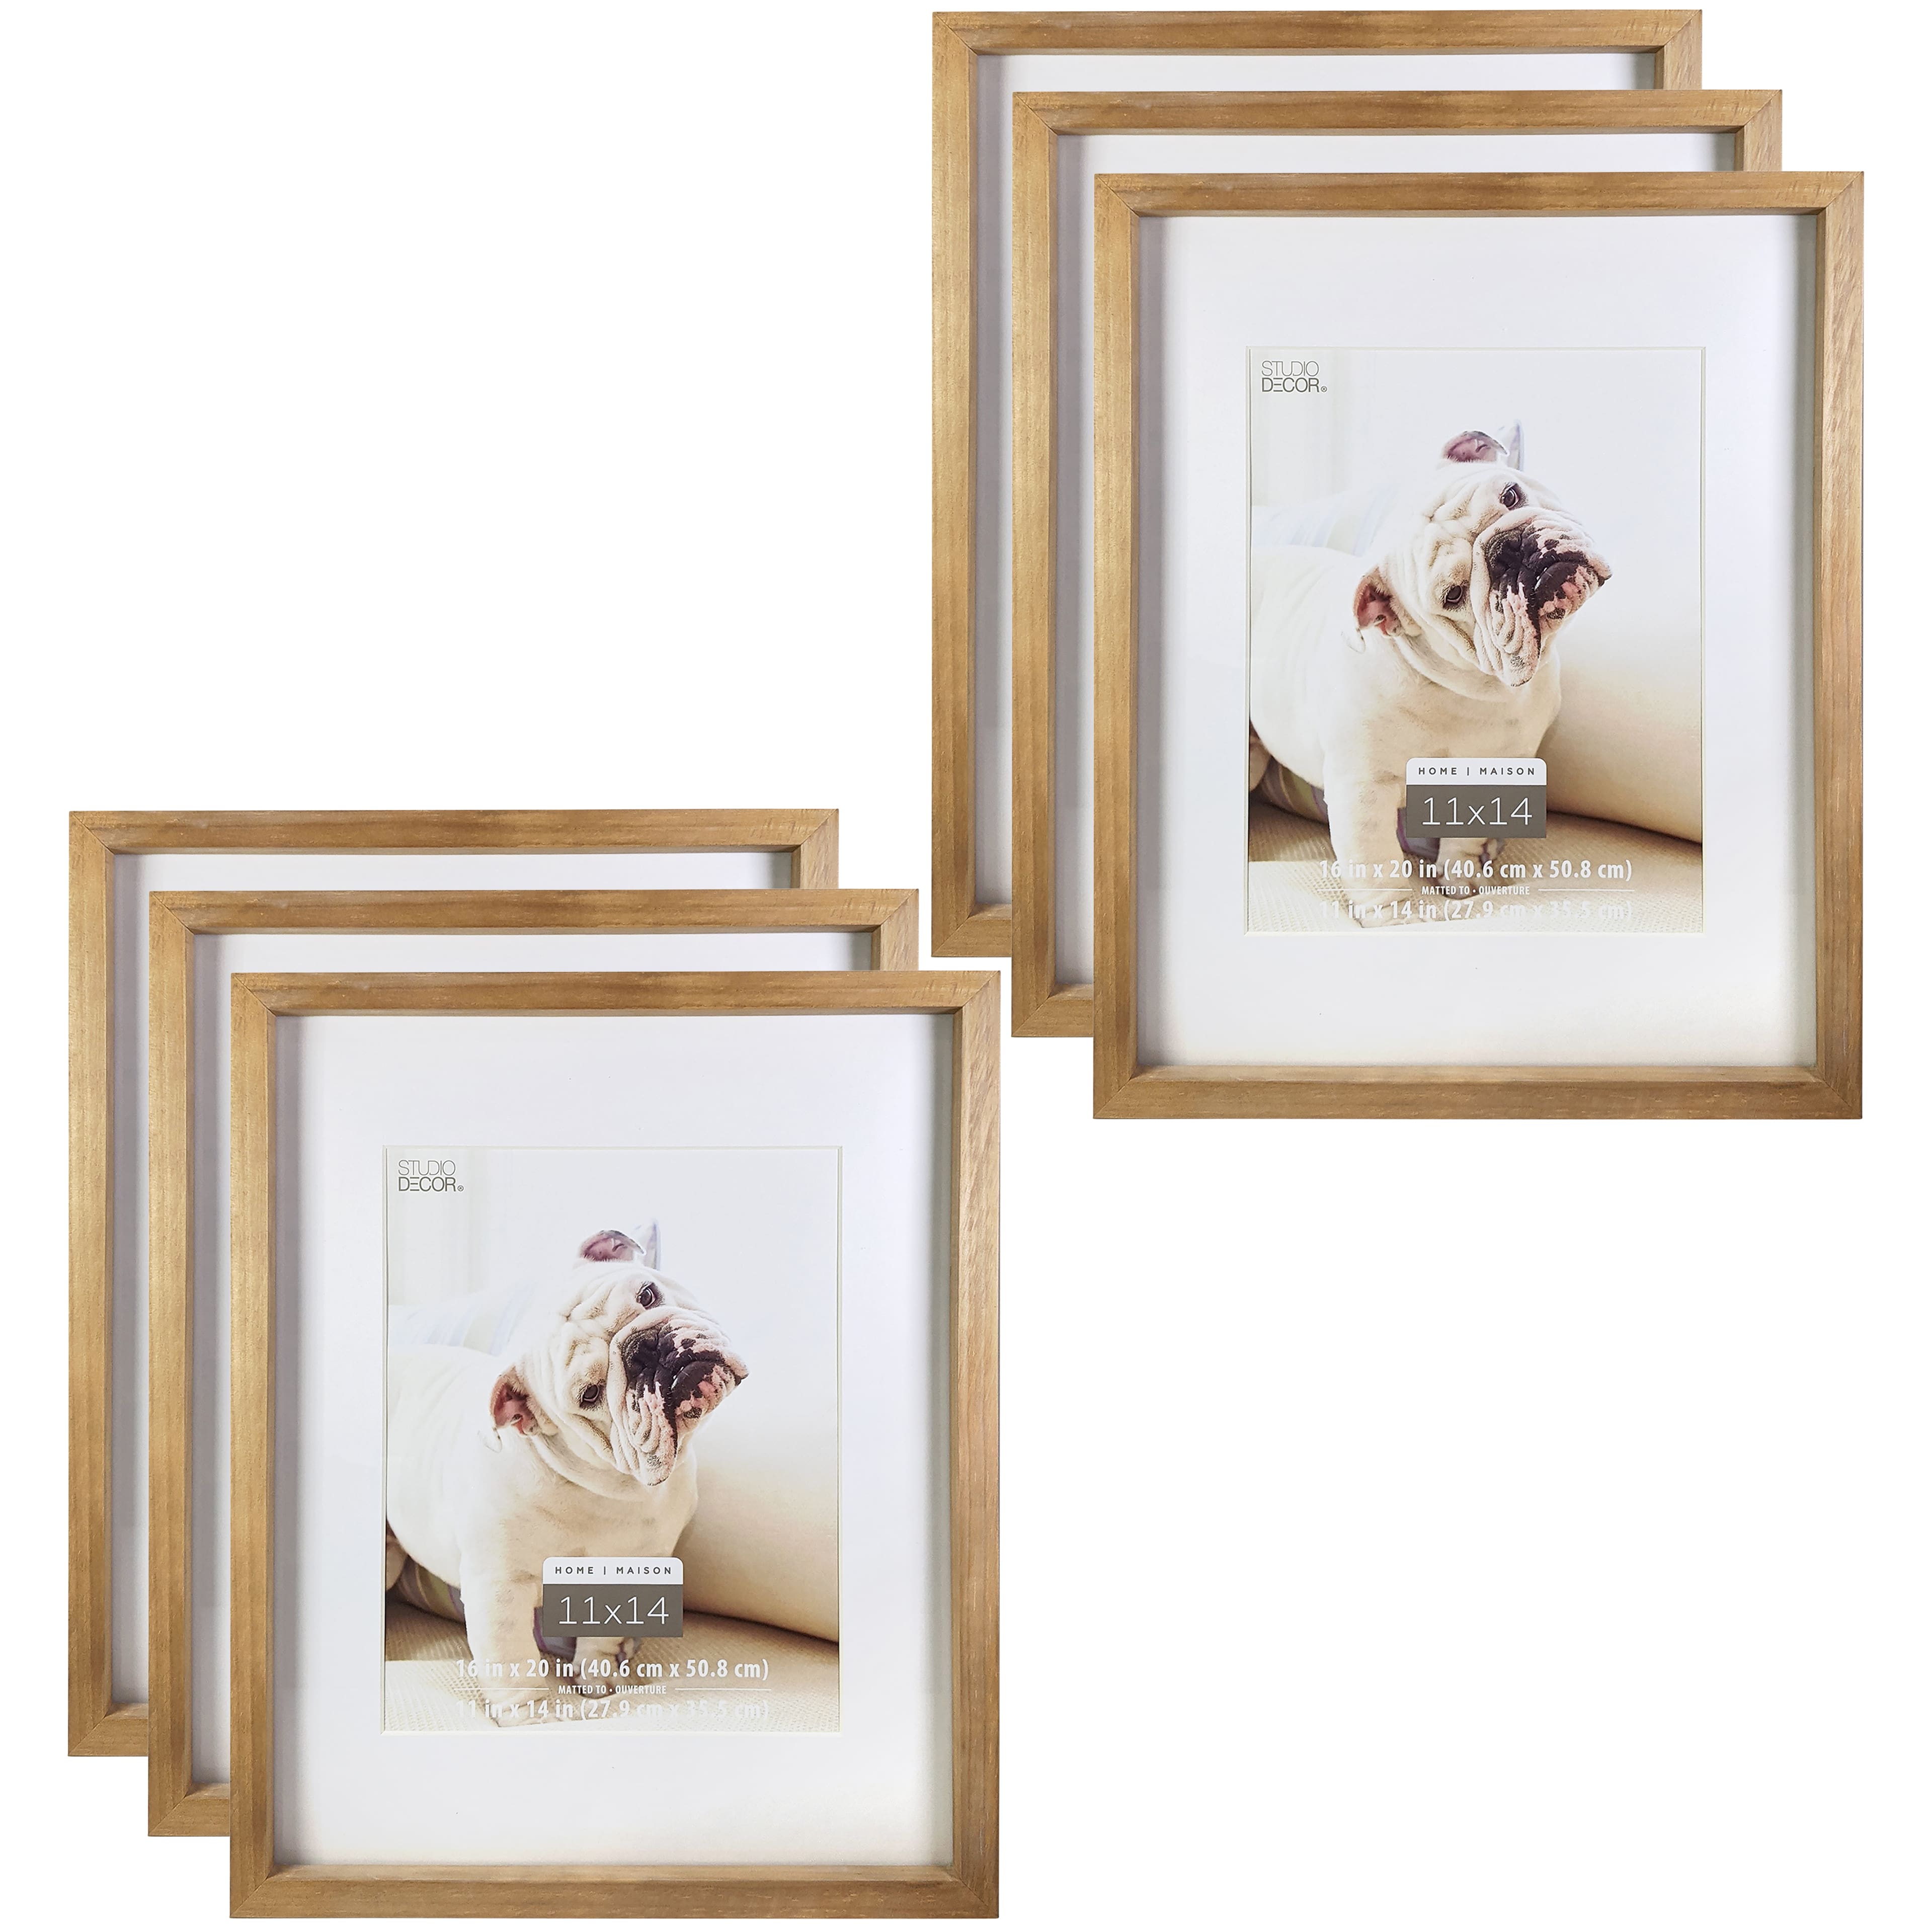 6 Pack 16x20 Gallery Wall Picture Frames Matted to 11x14 Photo